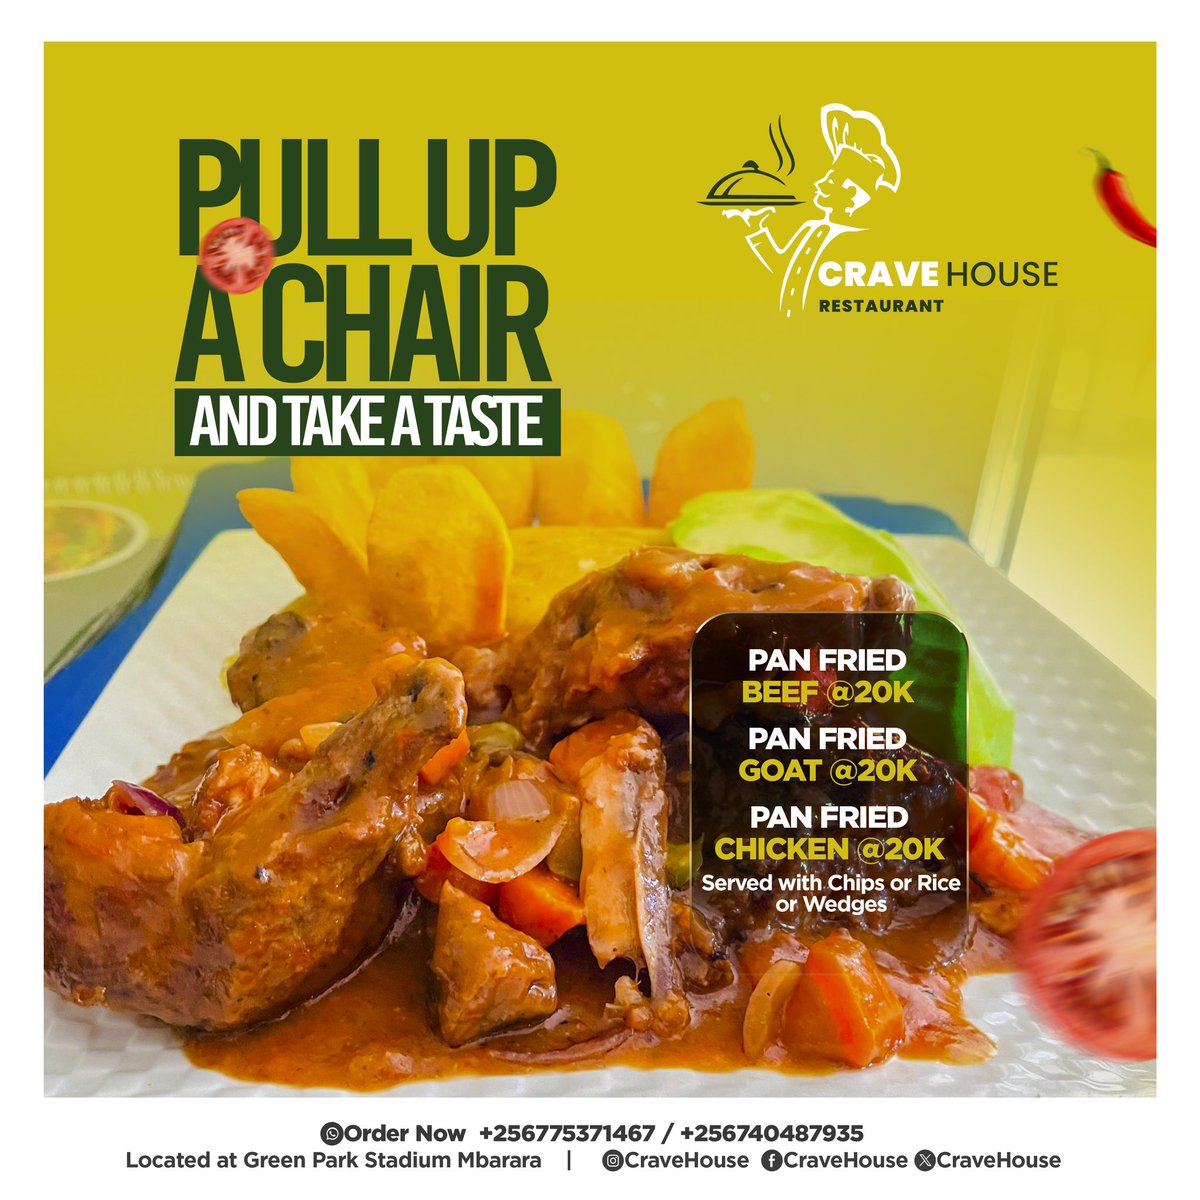 Craving some delicious pan fried beef, chicken, or goat? Head over to .@greenparkug for a taste sensation like no other! Delivery also available for ultimate convenience 📞 +256775371467 #CraveHouseRestaurant